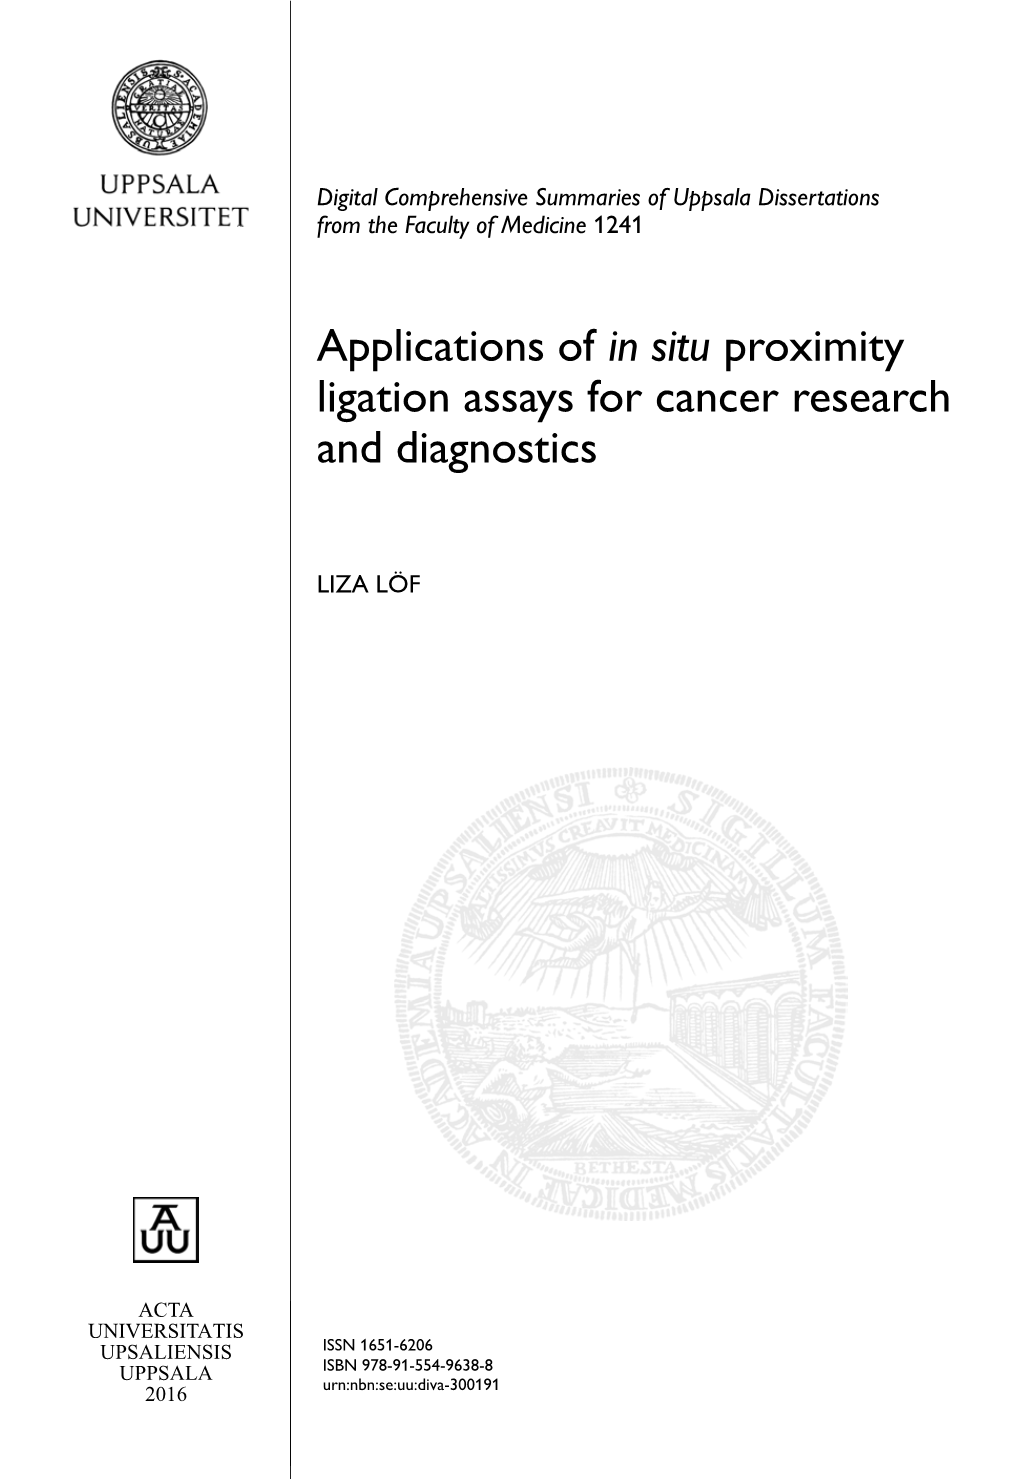 Applications of in Situ Proximity Ligation Assays for Cancer Research and Diagnostics